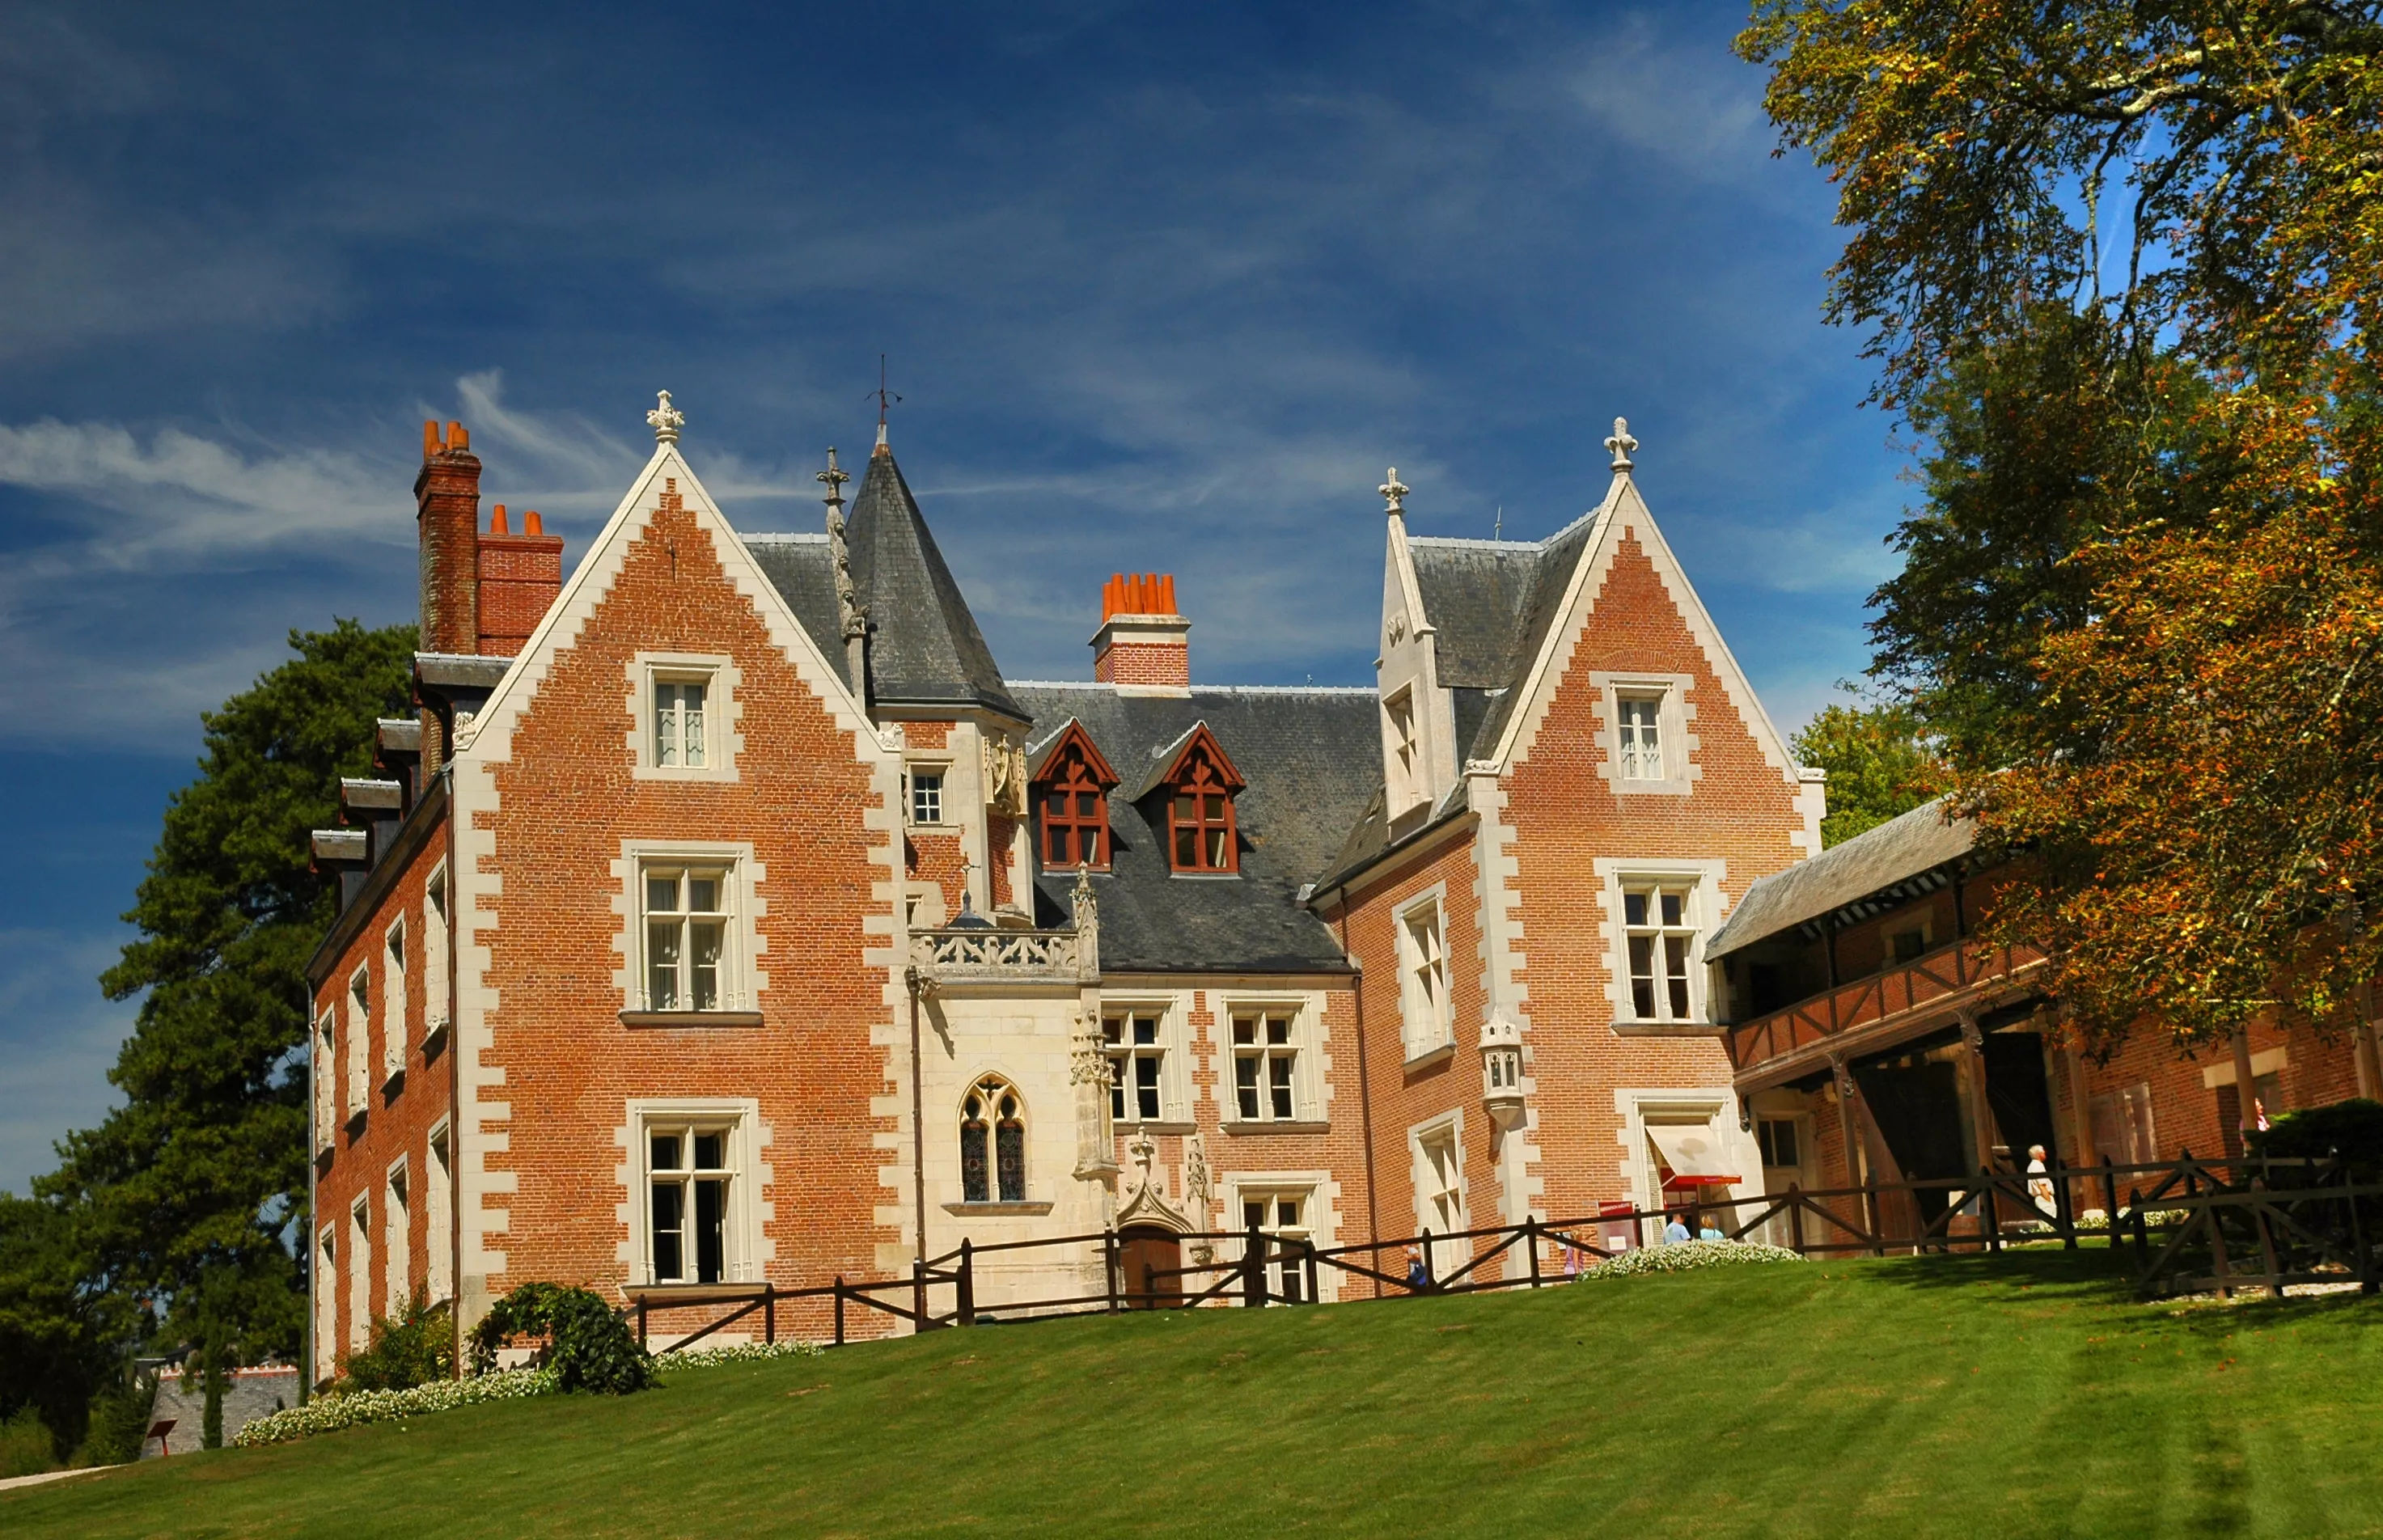 The Clos luce in France, Europe | Castles - Rated 4